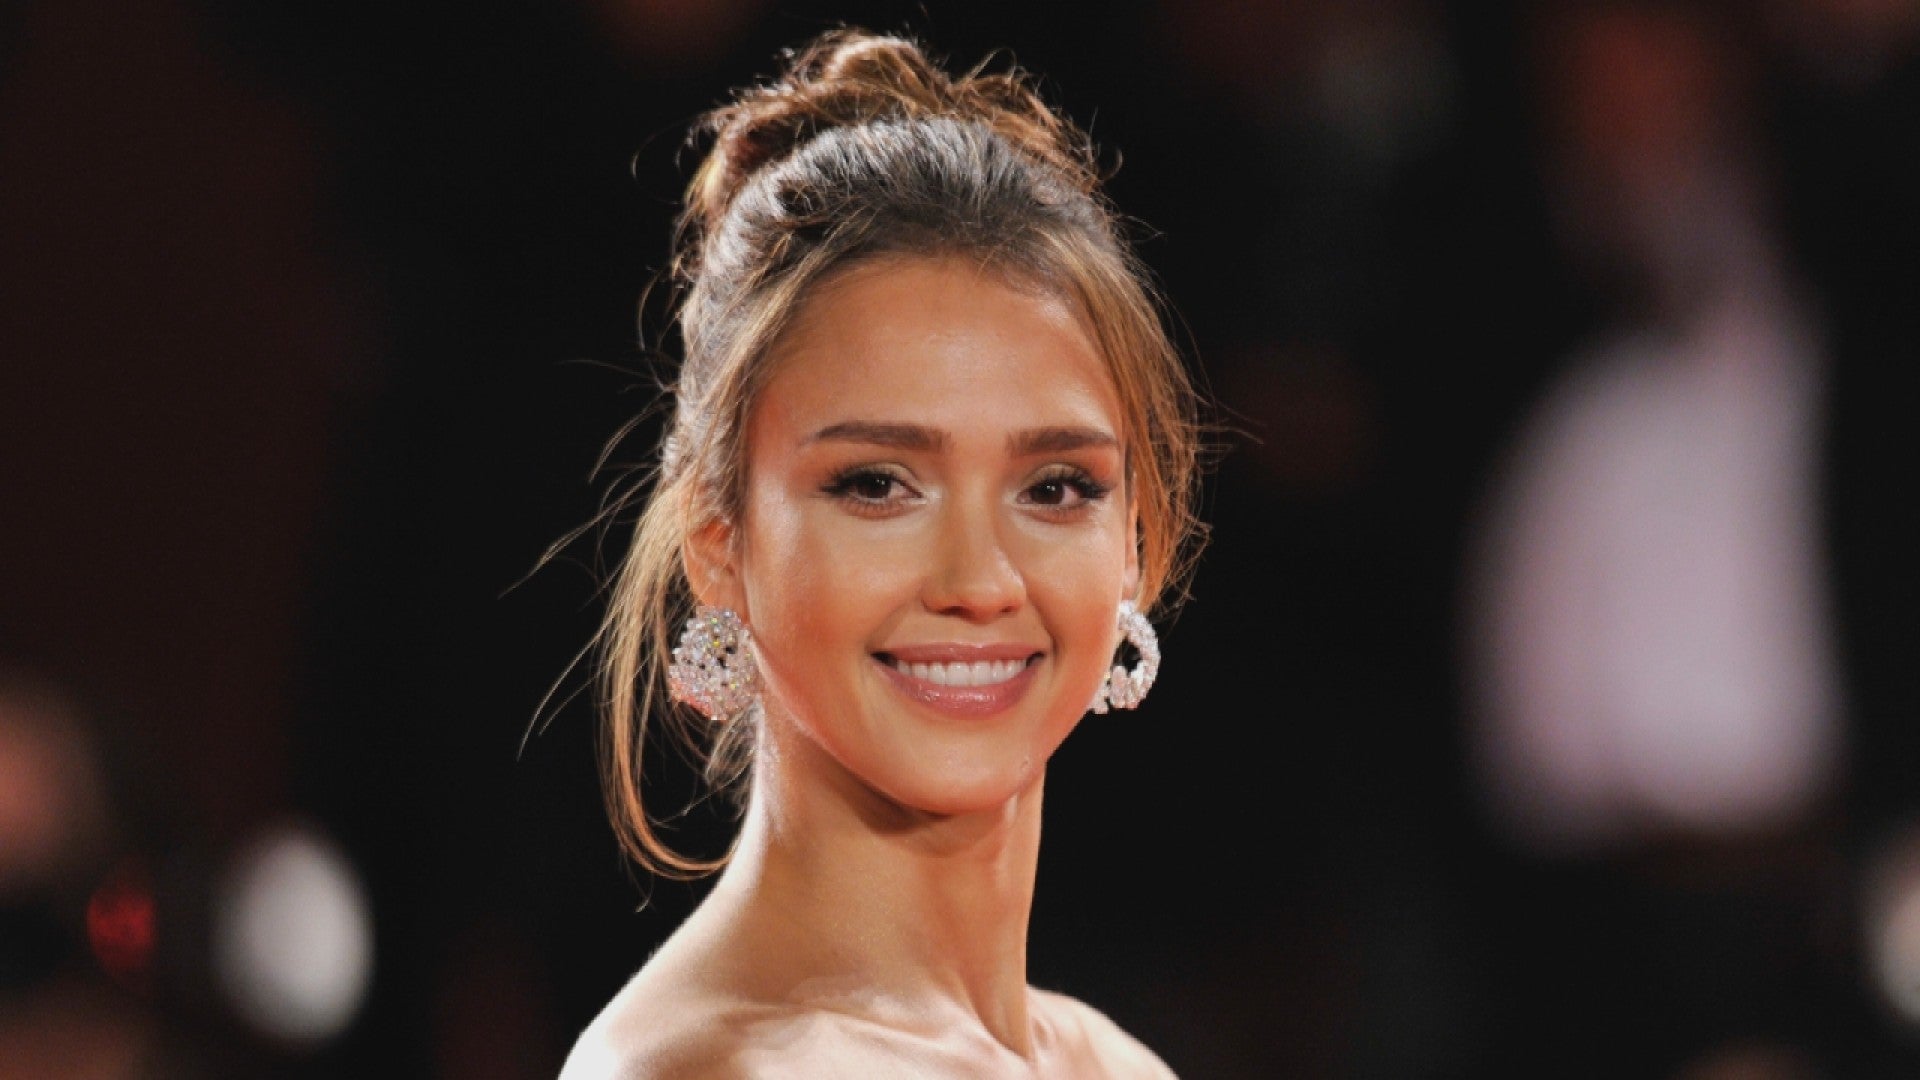 Jessica Alba Sexy Nude Lesbian - Jessica Alba Admits Her Sexuality Made Her 'Very Uncomfortable'